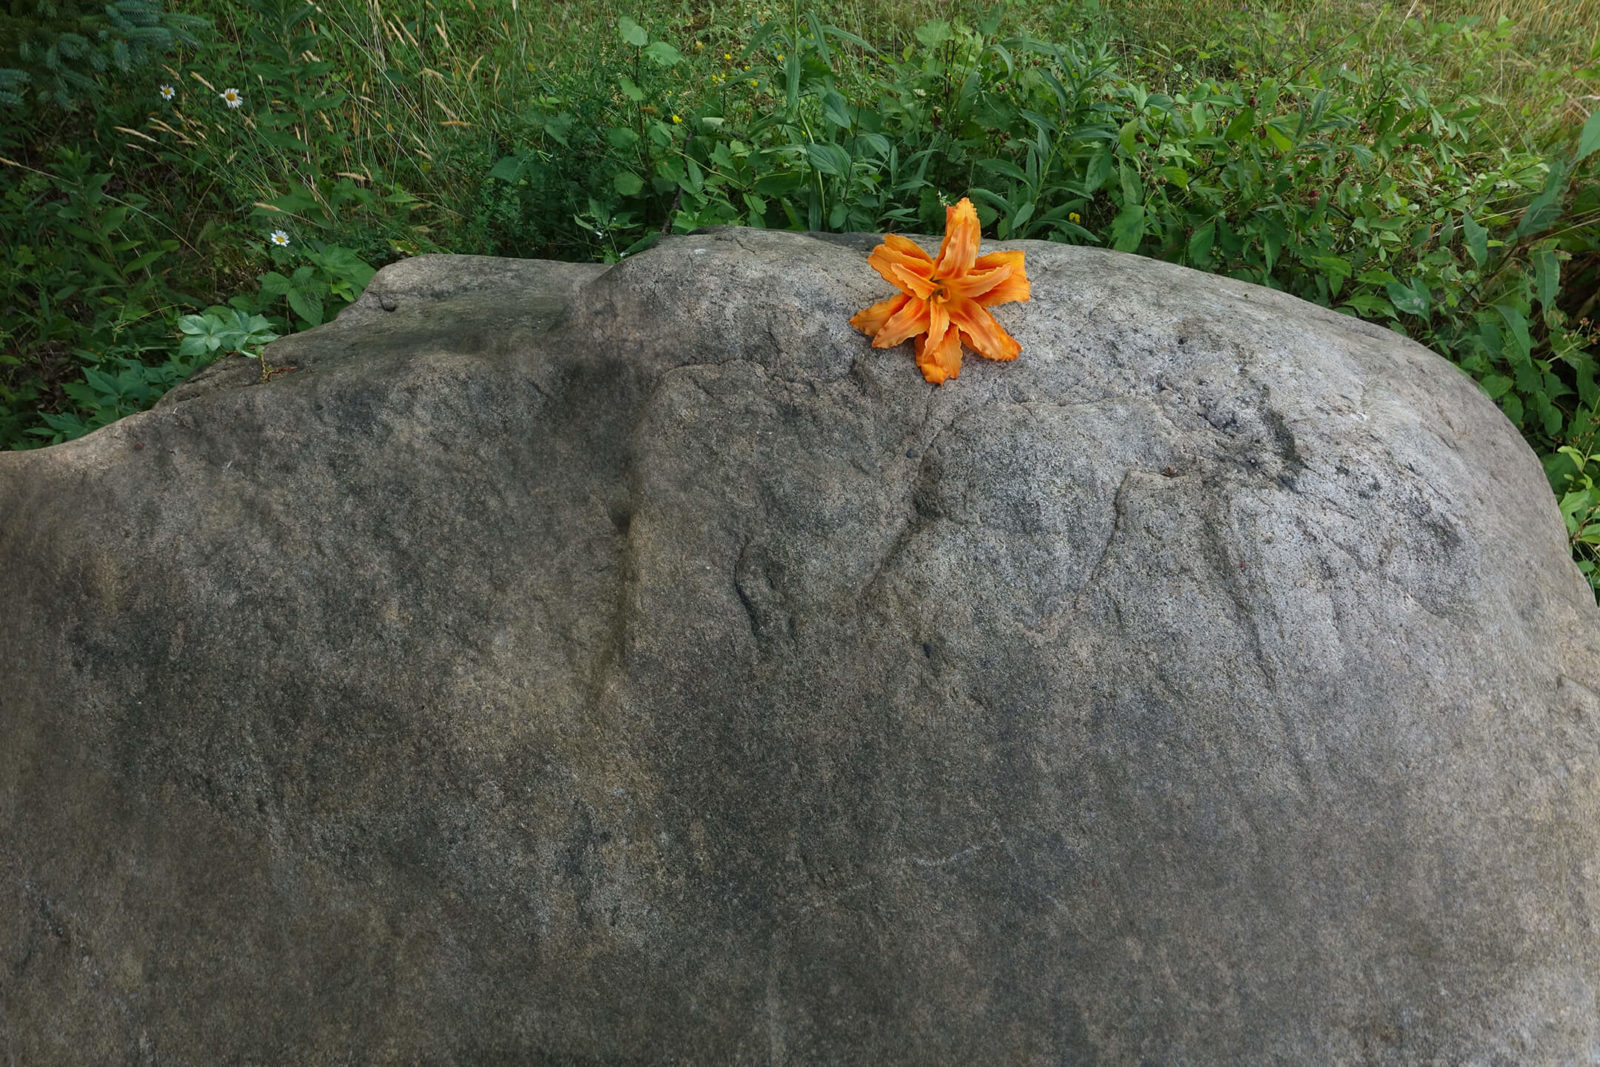 Robin Botie of Ithaca, New York, photographs a daylily on top of a boulder in her rock garden that could be two million years old.